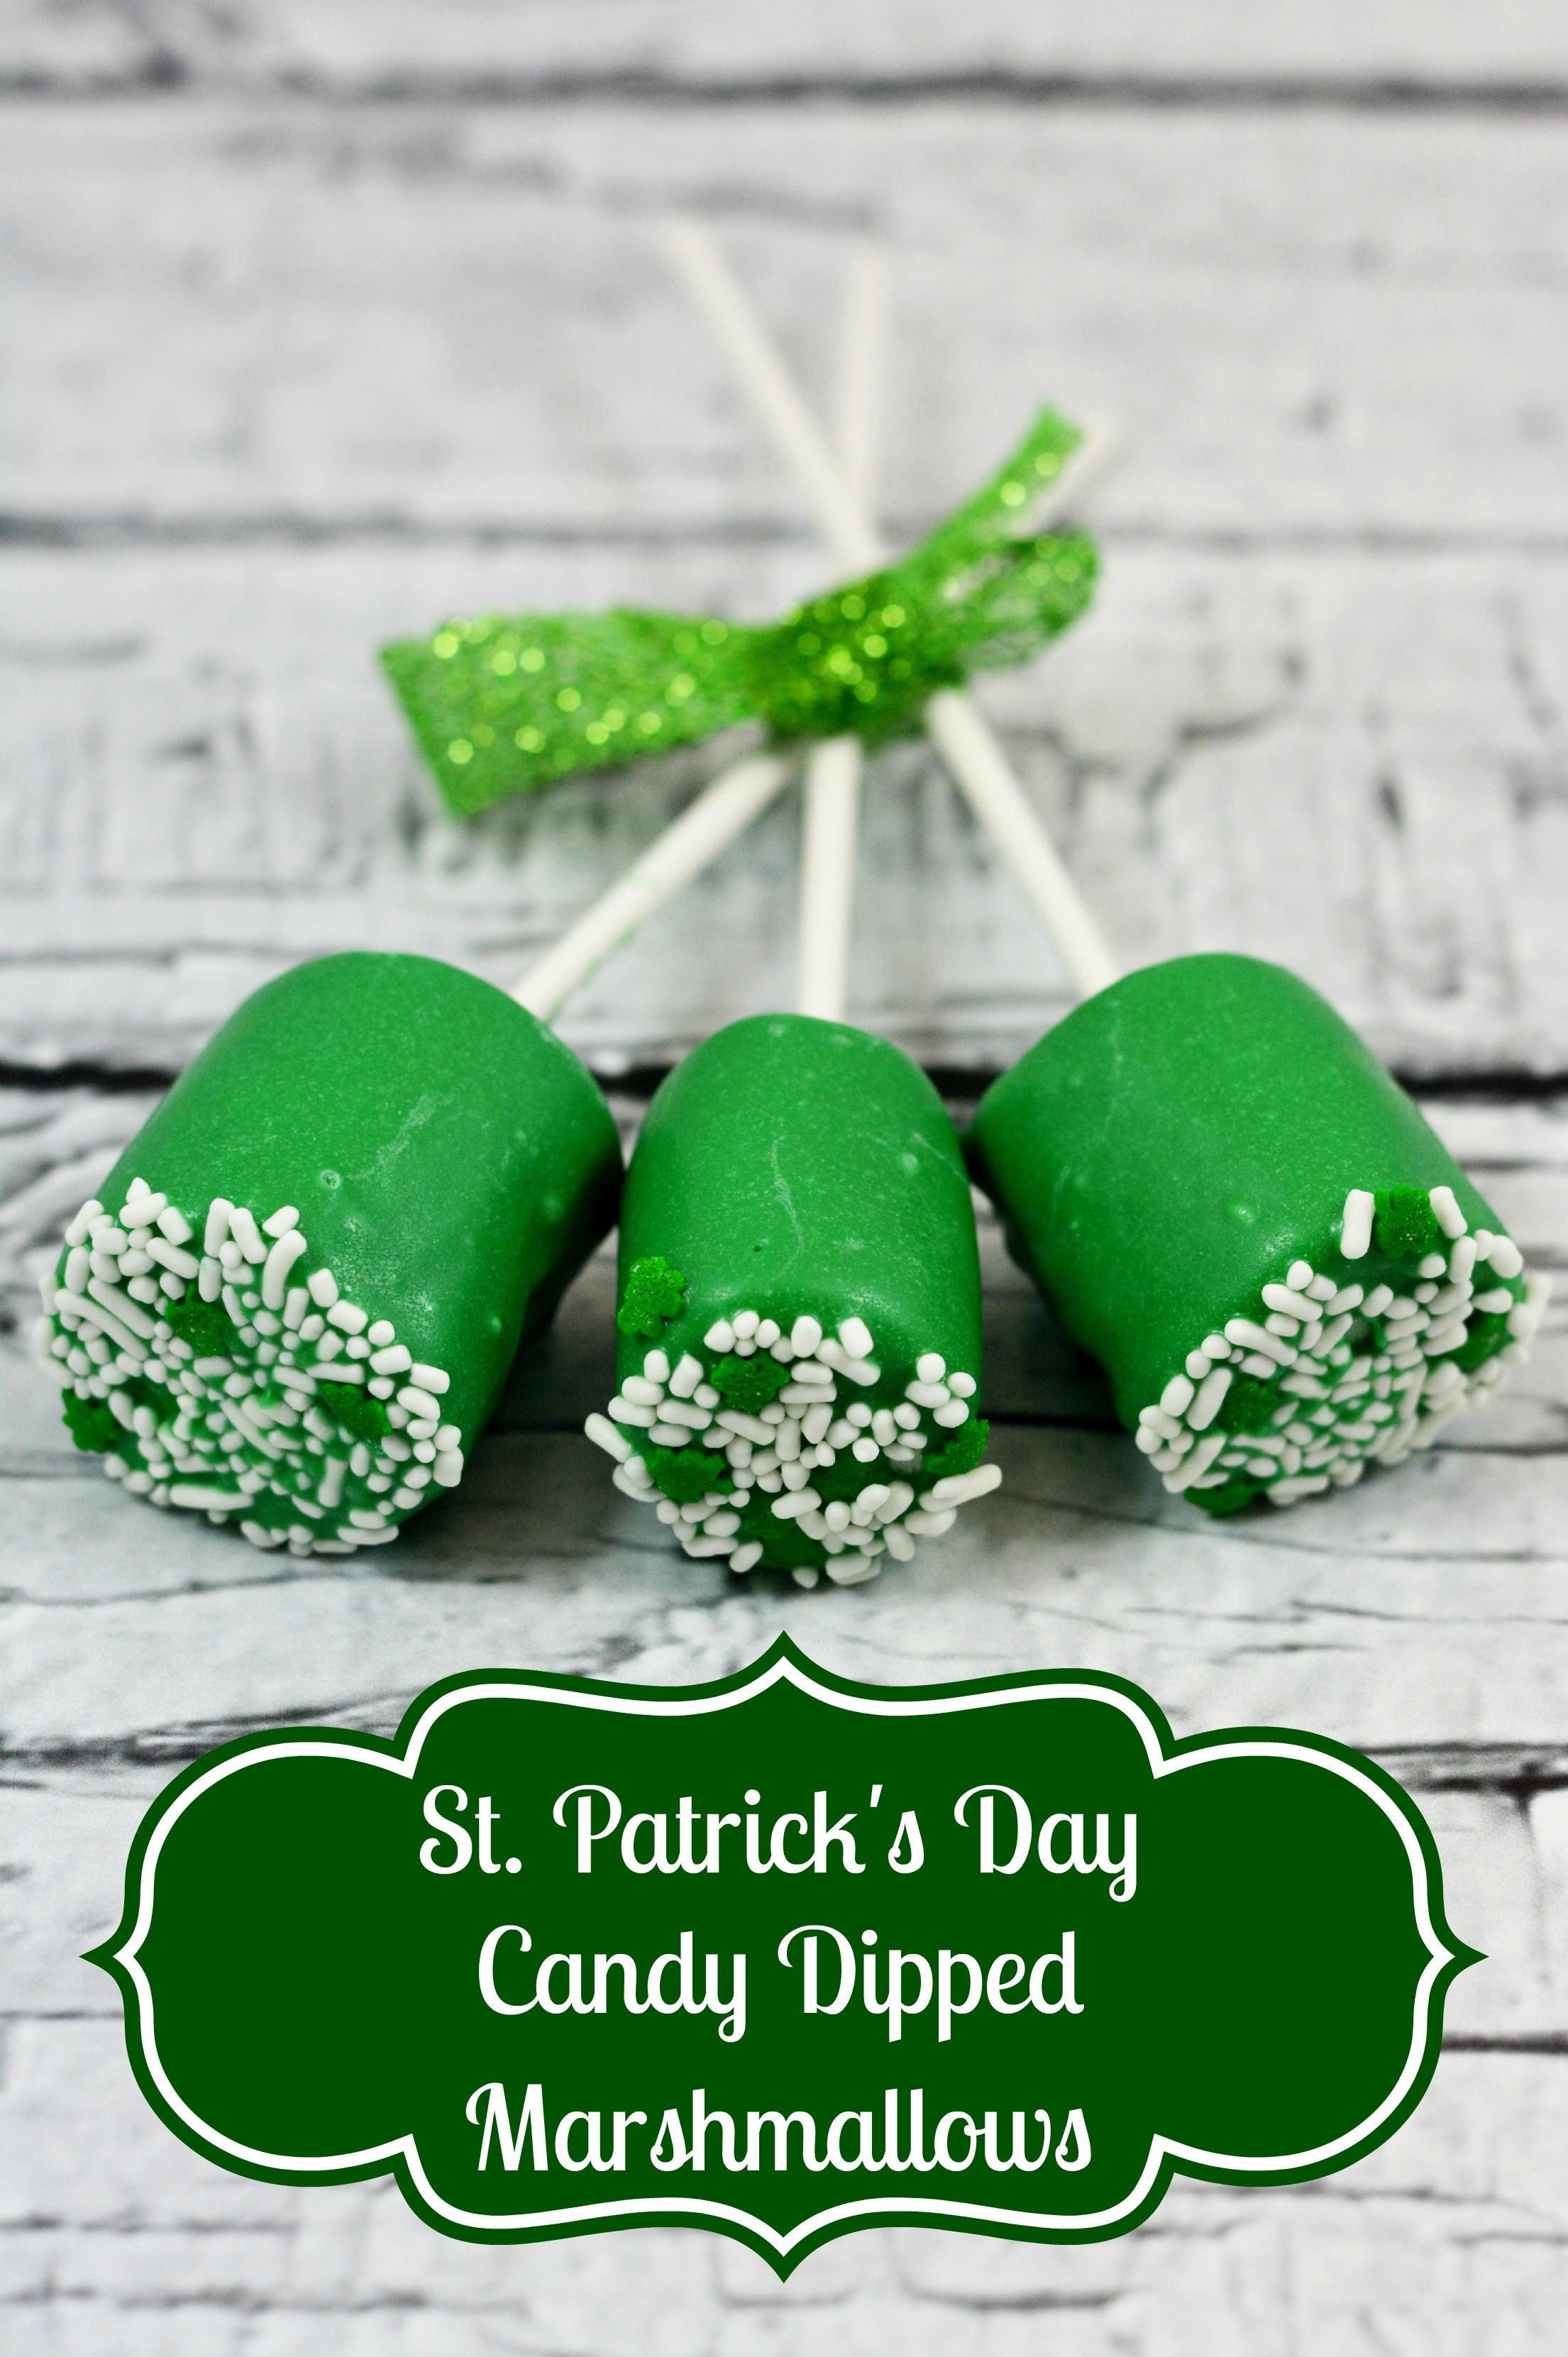 St. Patrick's Day Candy Dipped Marshmallows at thatbaldchick.com